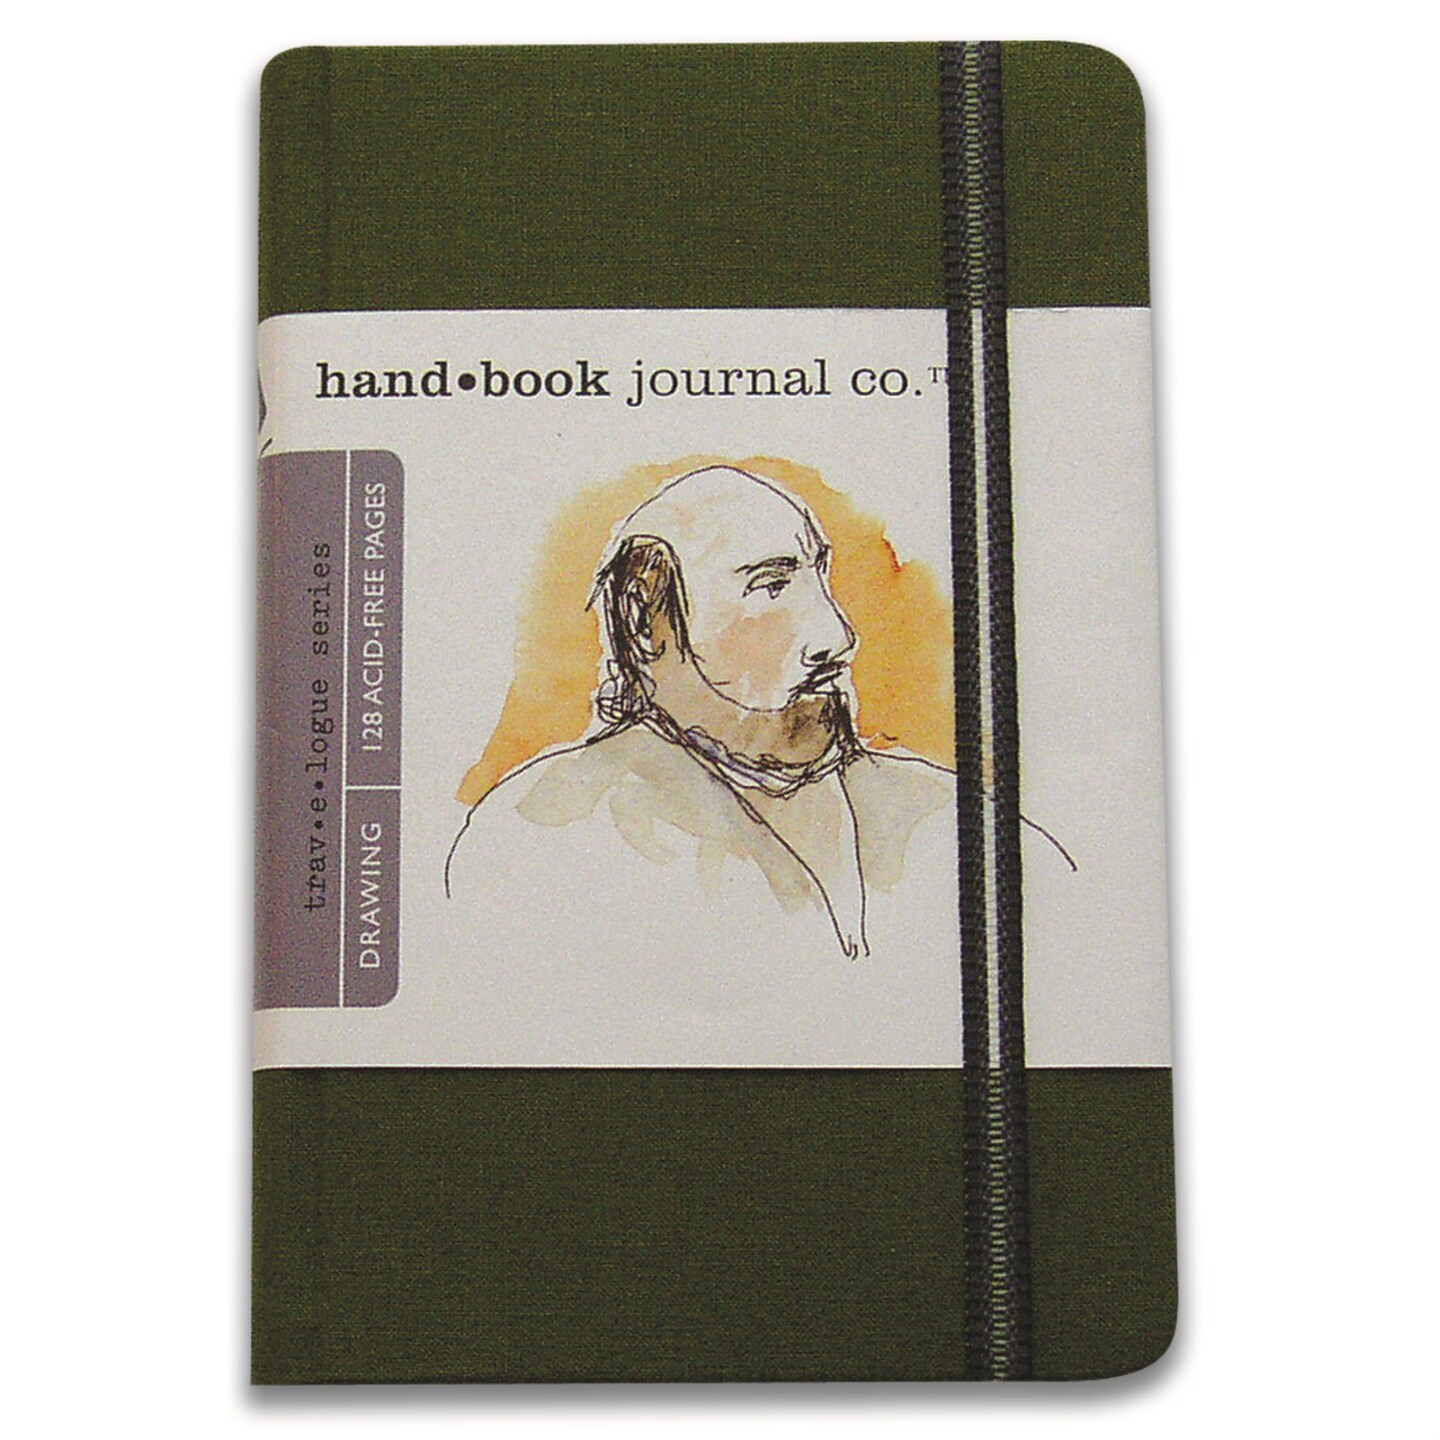 Handbook Journal Co. Artist Canvas Cover Travel Notebook for Drawing and Sketching, Cadmium Green, Pocket Portrait 5.5 x 3.5 Inches, 130 GSM Paper, Hardcover w/ Pocket